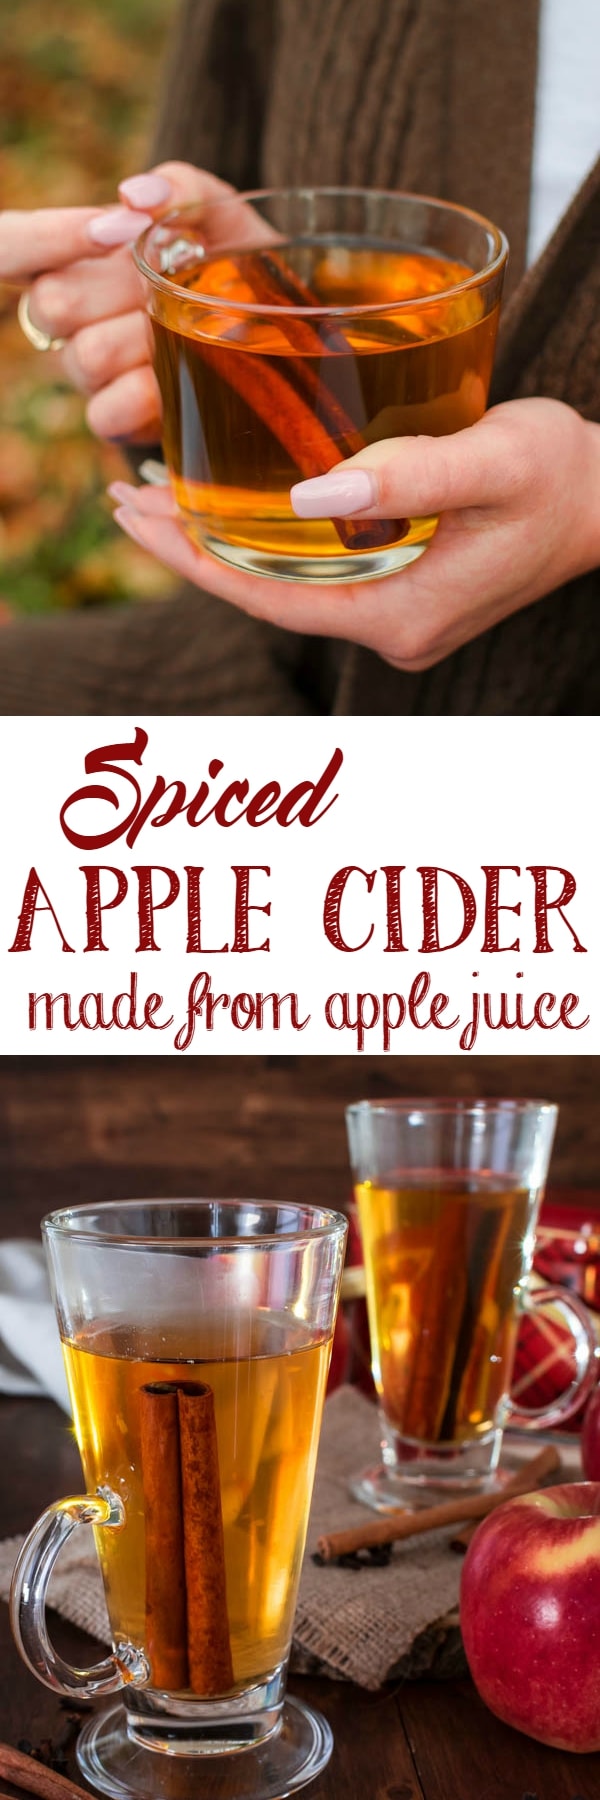 Spiced Apple Cider Made from Apple Juice (Video ...